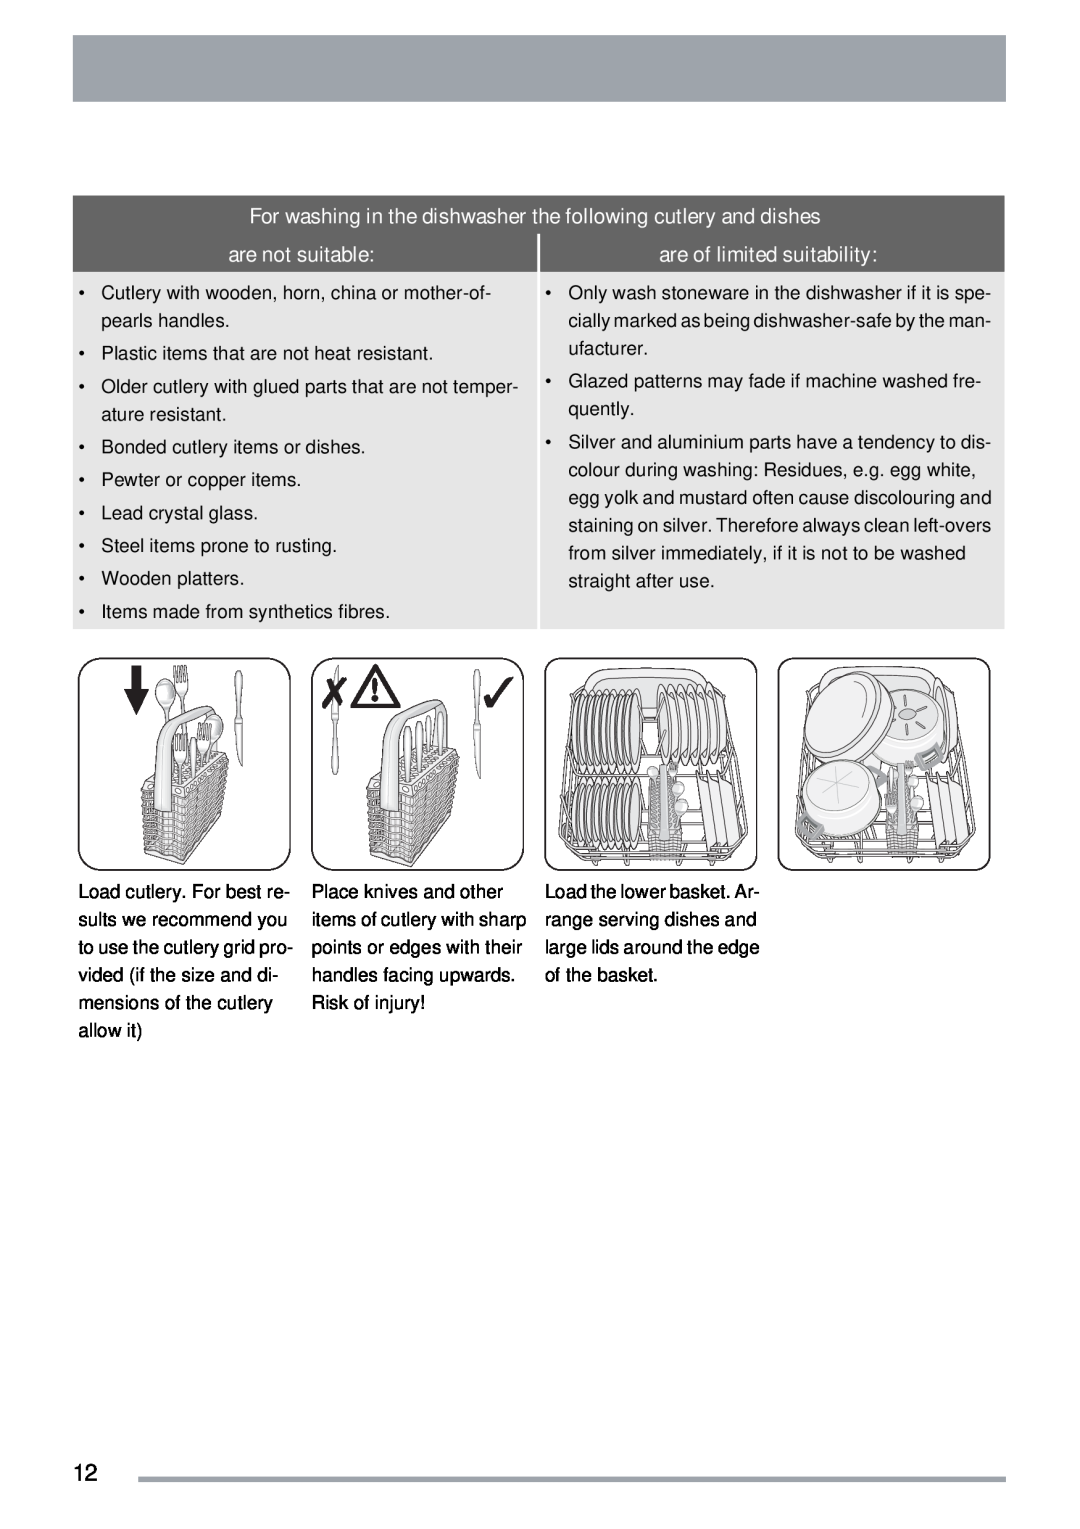 Zanussi ZSF 4143 user manual For washing in the dishwasher the following cutlery and dishes, are not suitable 